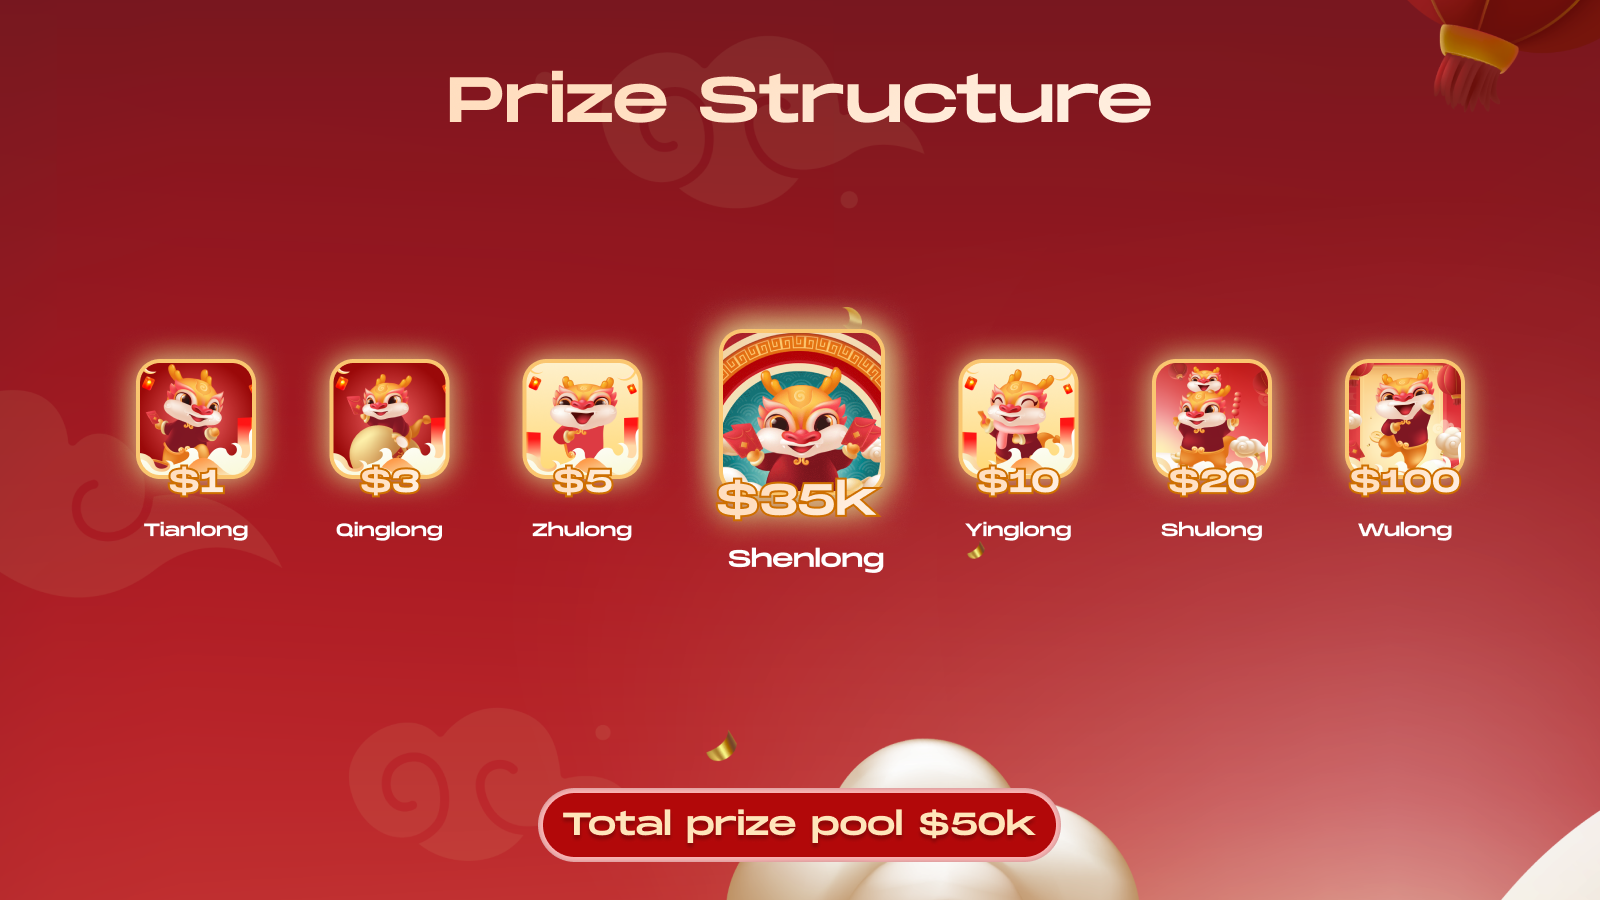 Prize Structure